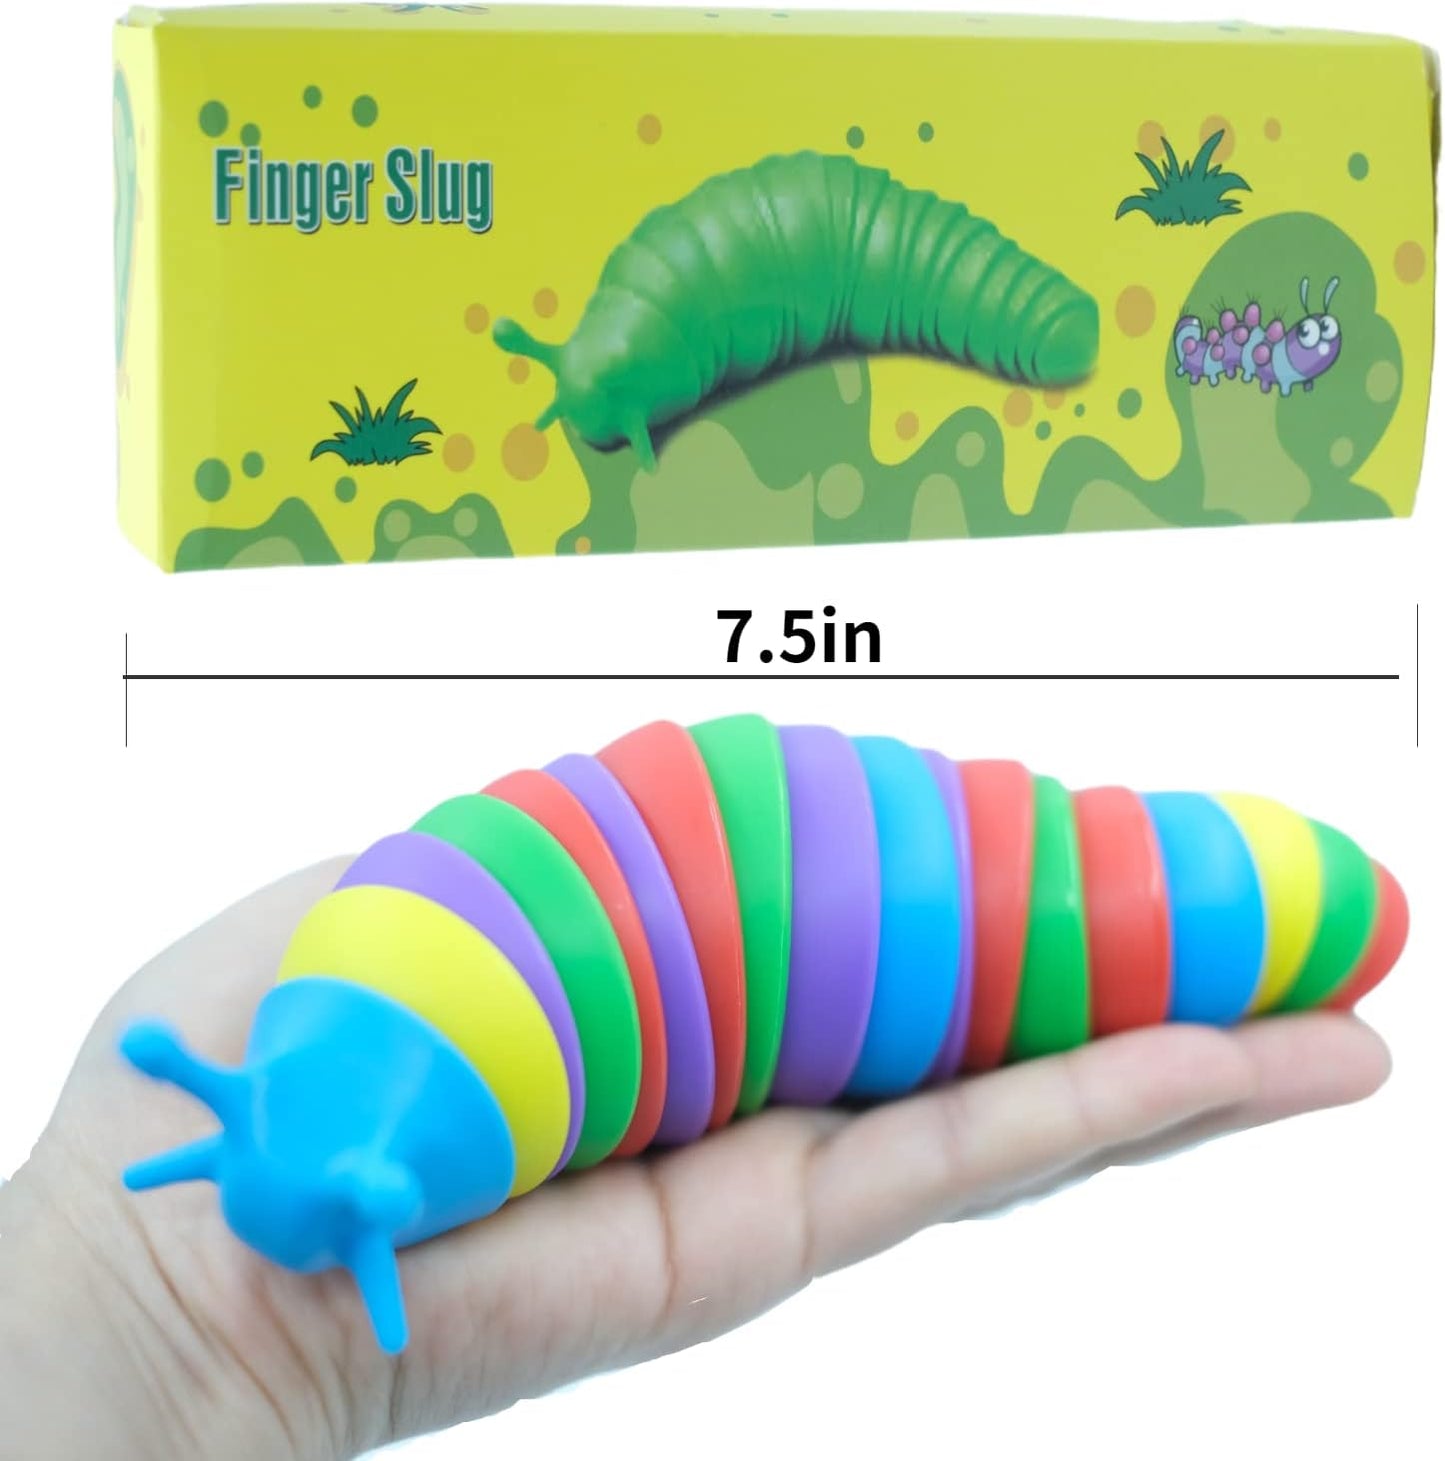 At the top, a fidget slug box. At the bottom, a person holds out a fidget slug in their hands. A measuring line indicates that the fidget slug is 7.5 inches long.